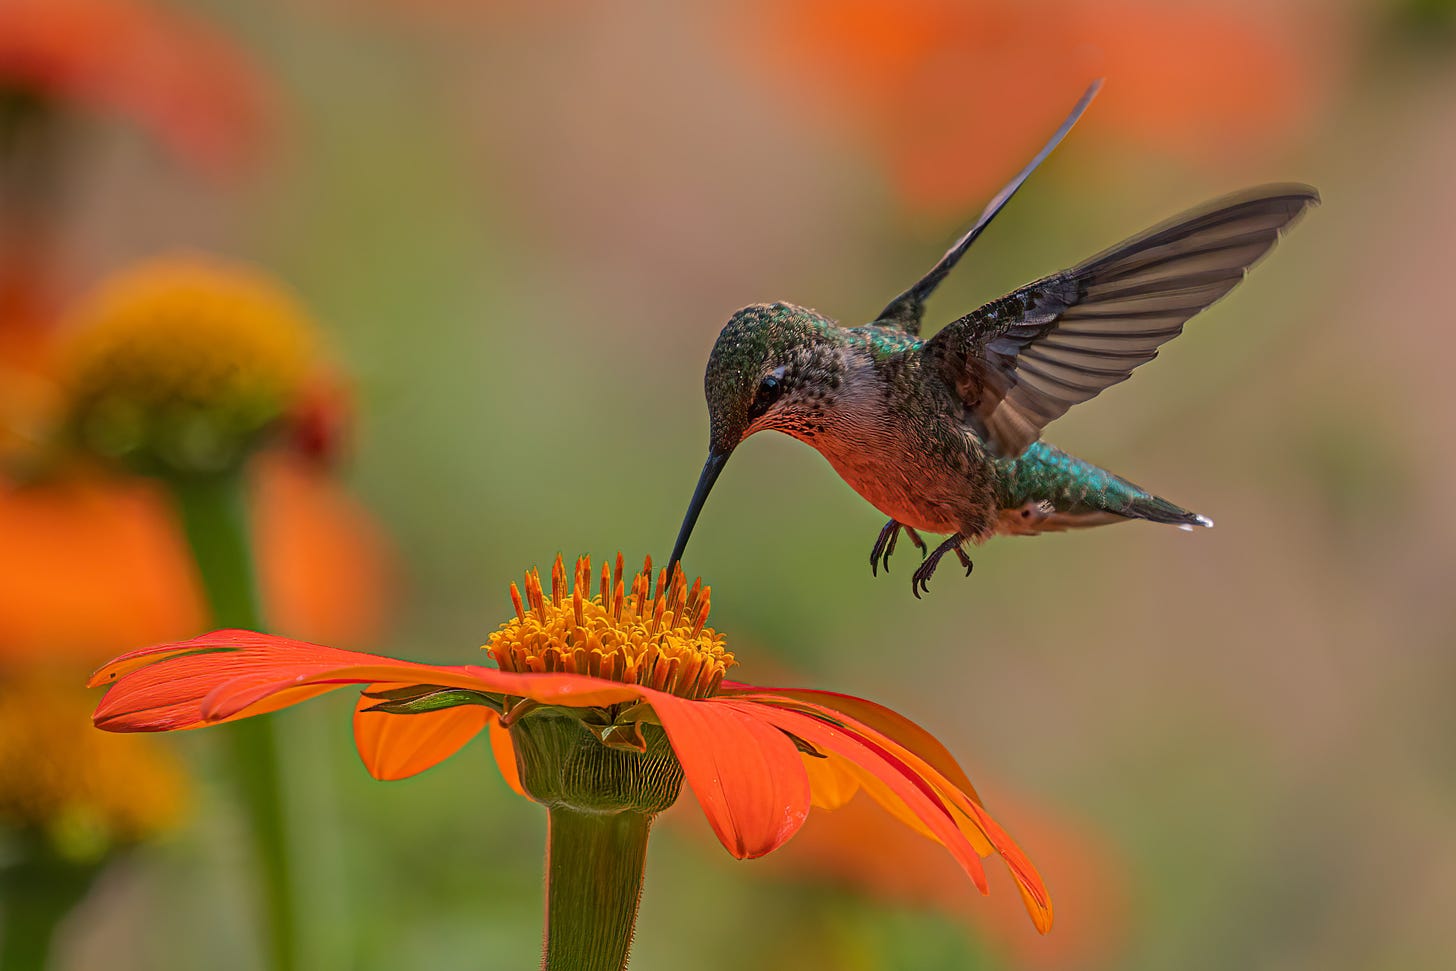 Hummingbird sipping from flower